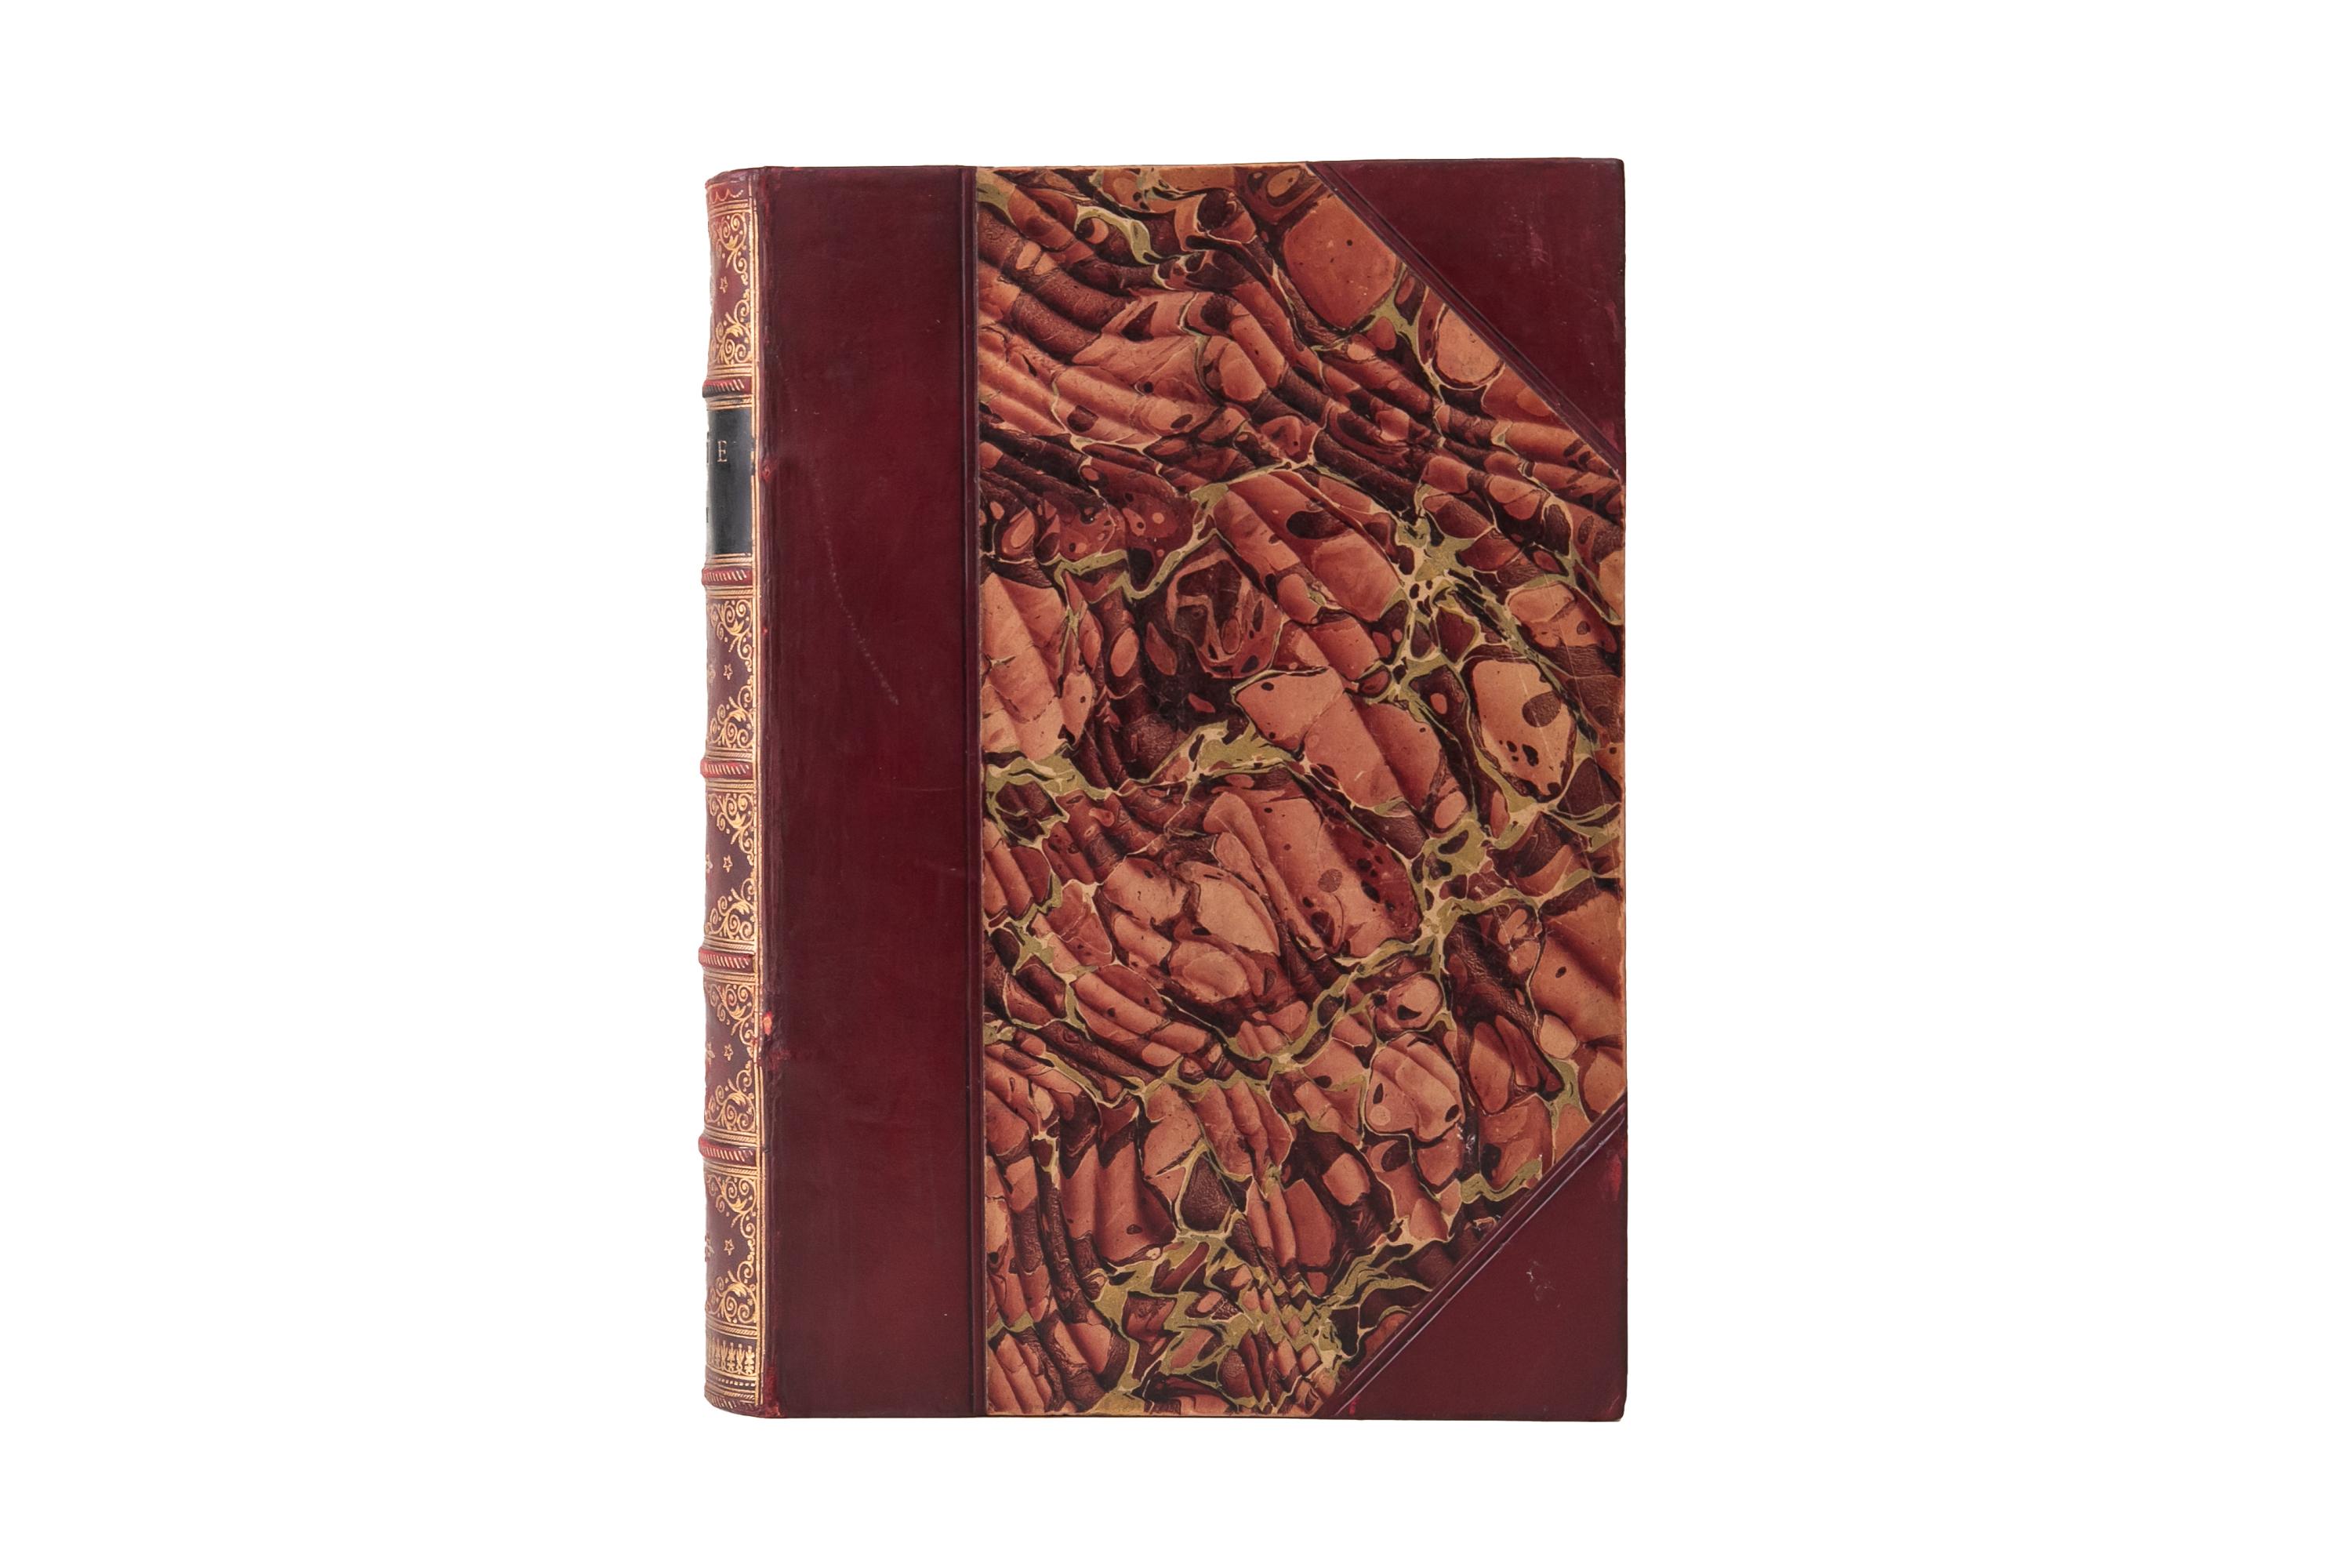 1 Volume. Dante Alighieri, The Vision. Bound in 3/4 wine calf decorated in gilt-tooling with a black morocco label. All edges marbled and marbled endpapers. Translated by Henry Francis Cary. Includes the life of Dante, a chronological view of his